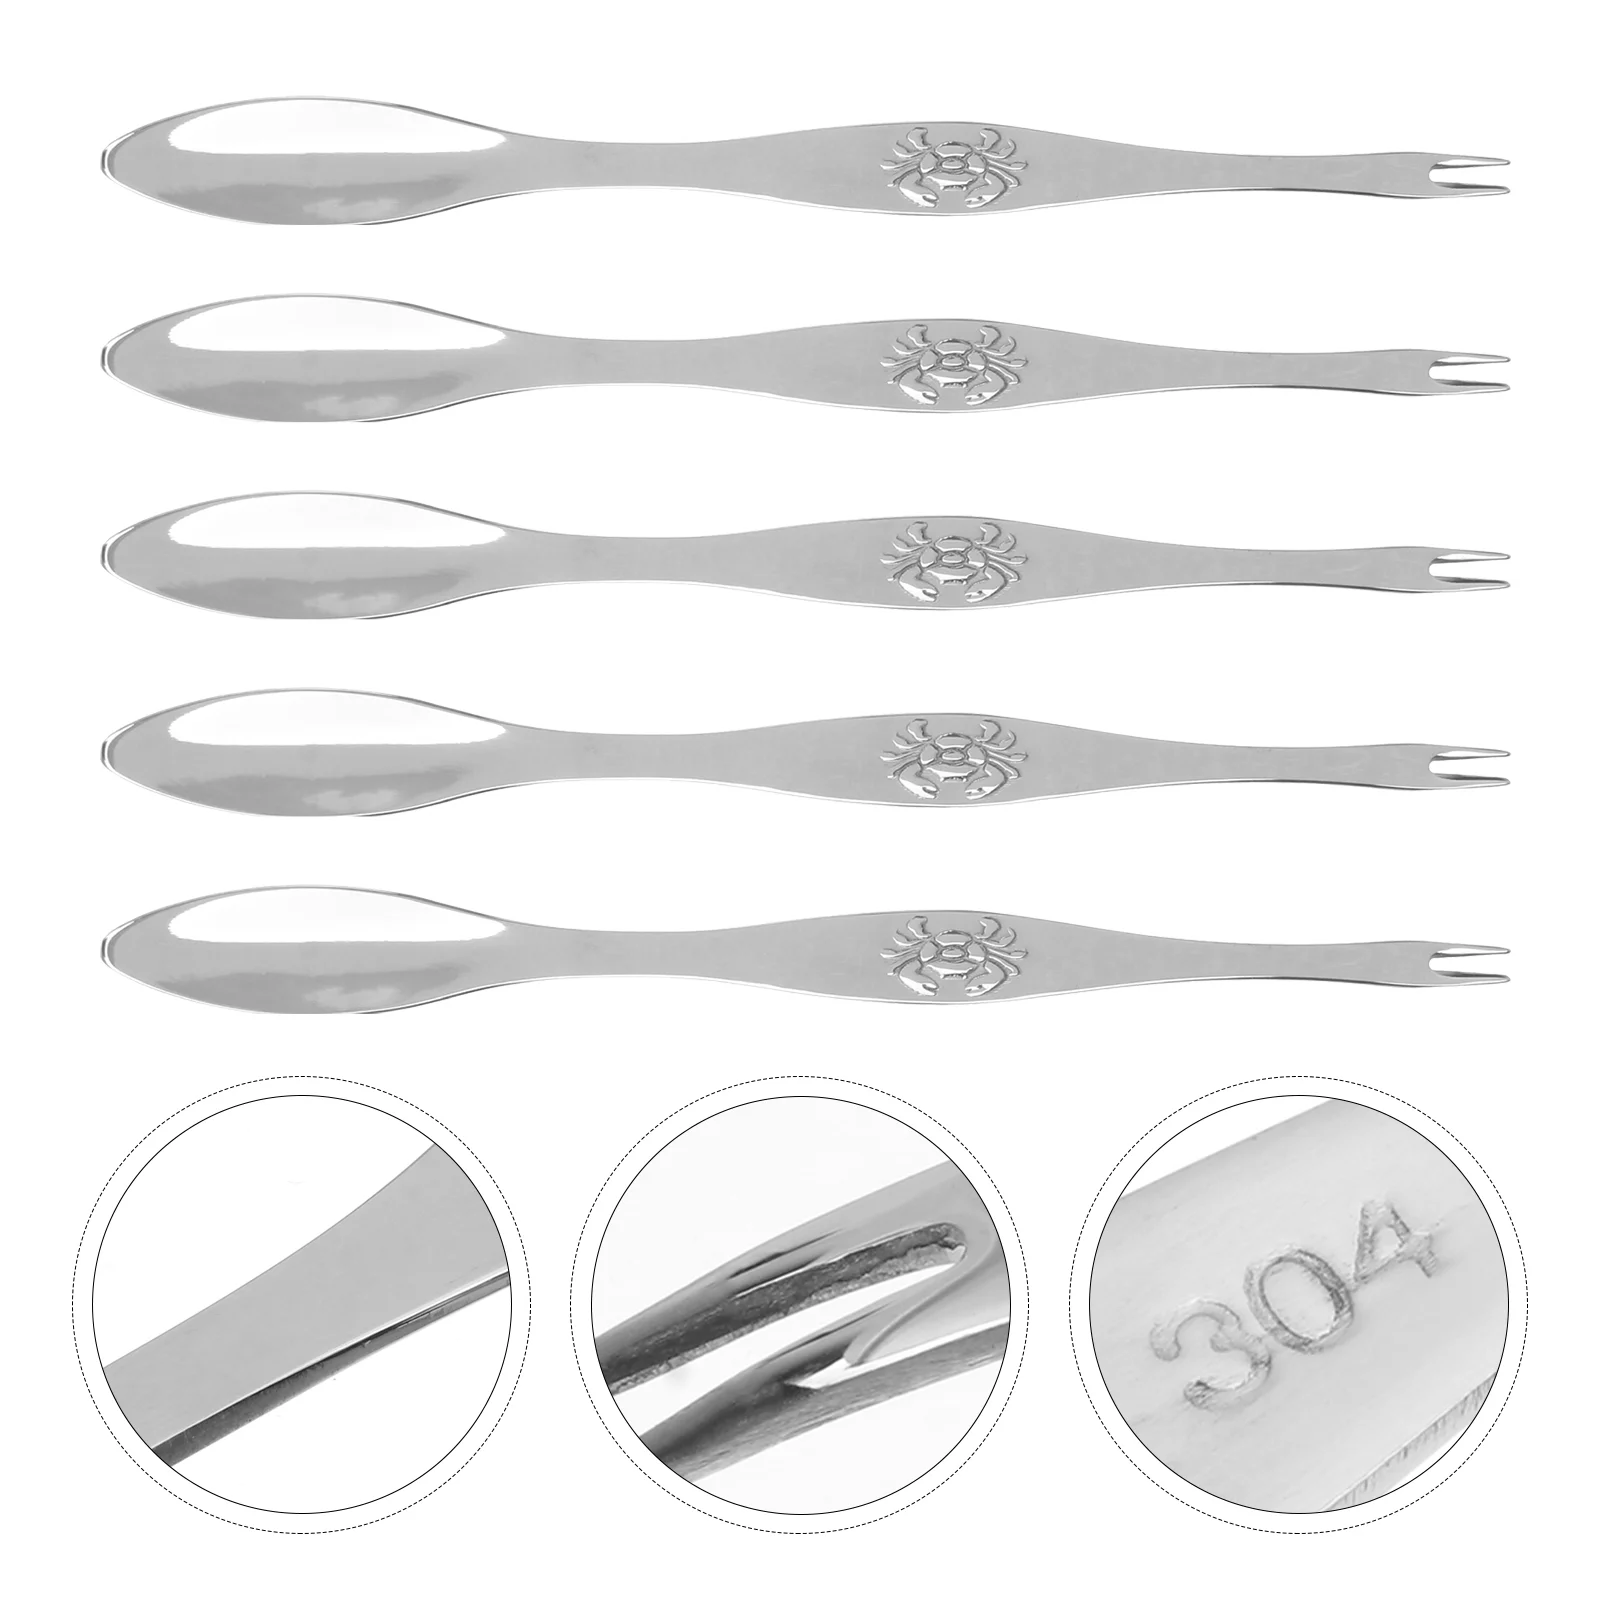 

5 Pcs Korean Stainless Steel Crab Fork Biscuits Lobster Picks and Crackers Seafood Eating Tools